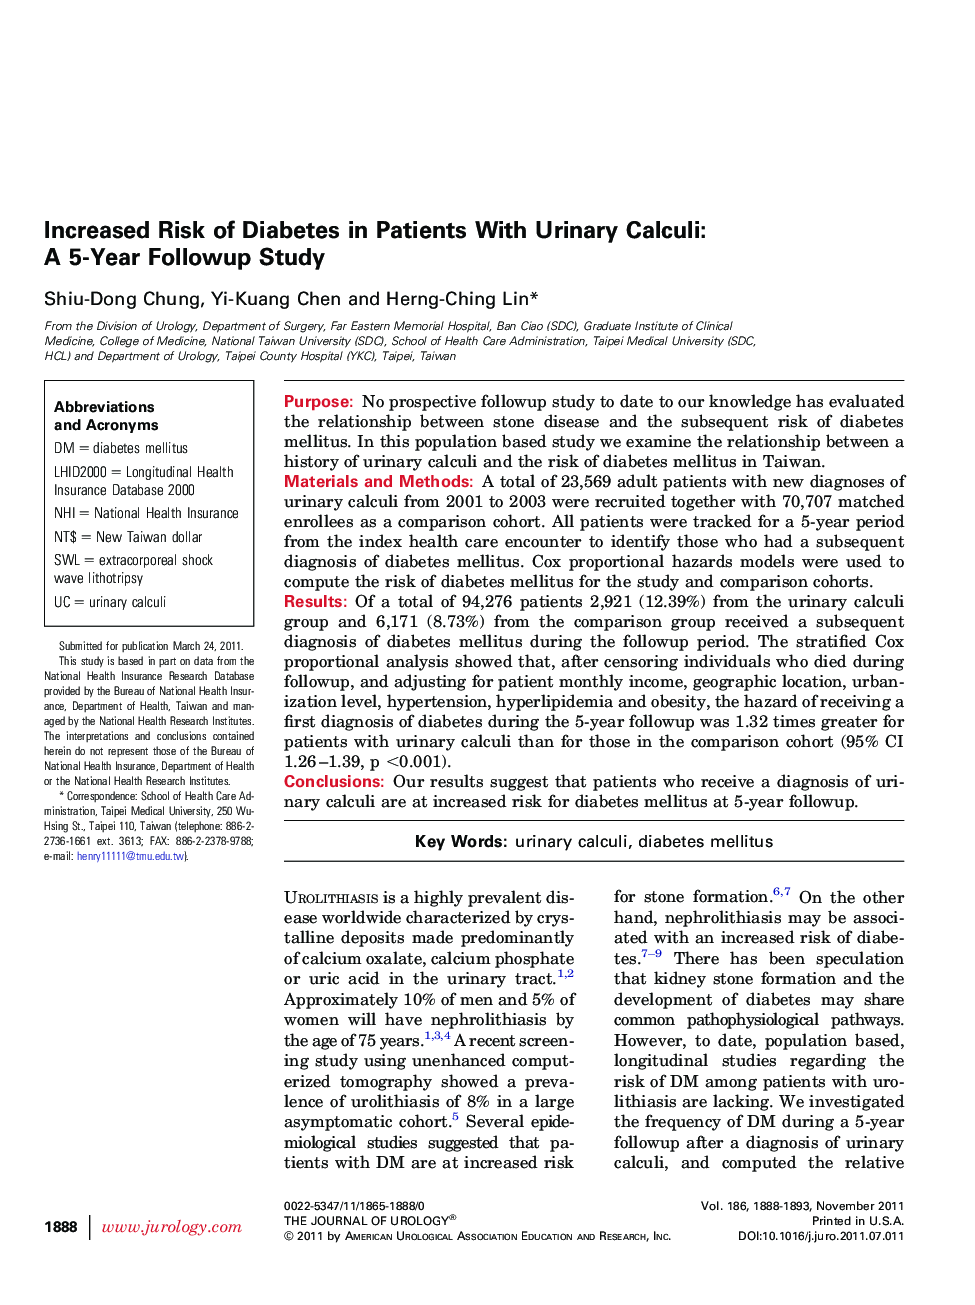 Increased Risk of Diabetes in Patients With Urinary Calculi: A 5-Year Followup Study 